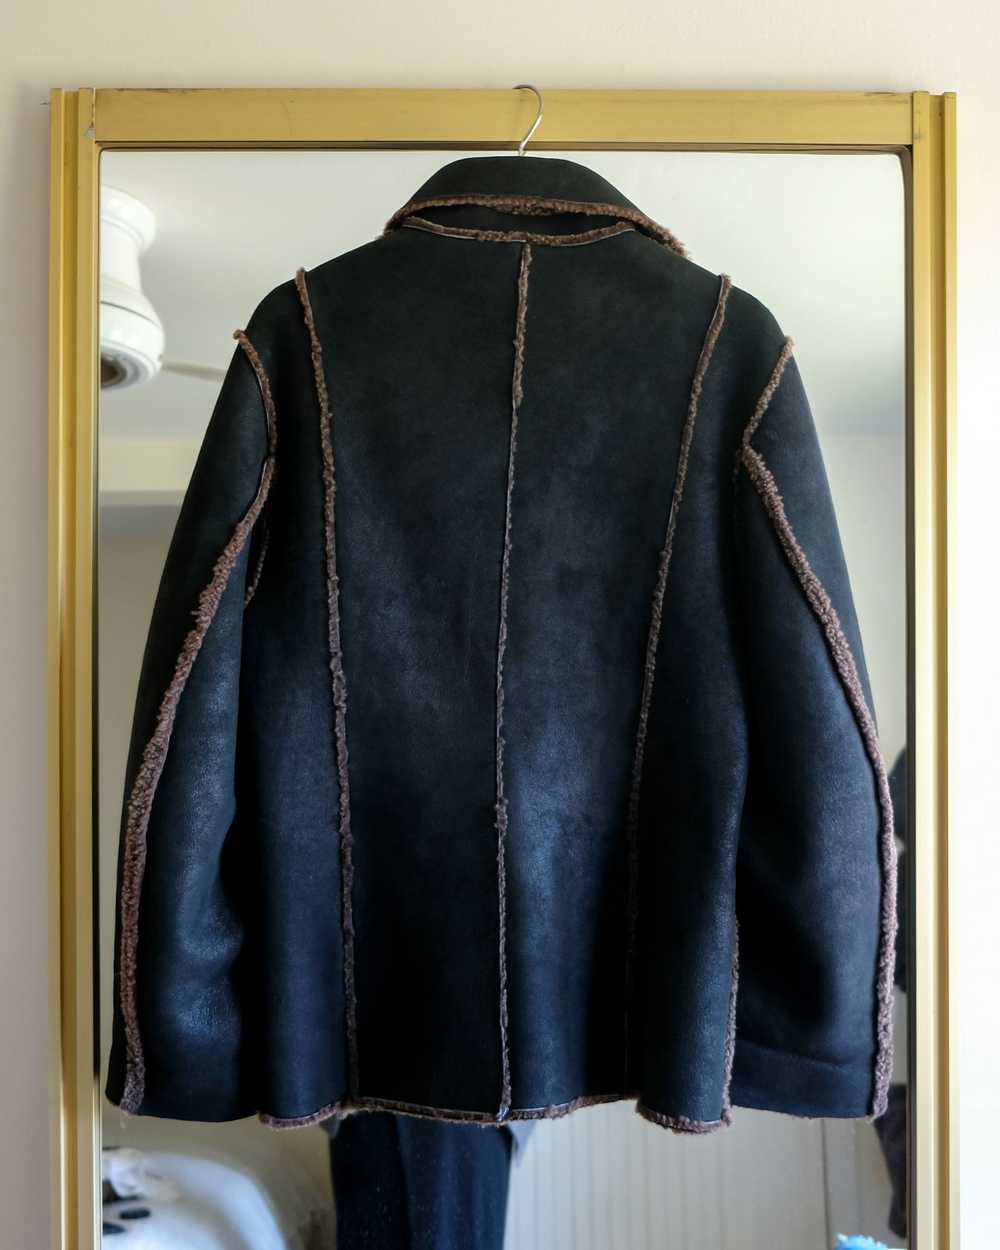 Ann Demeulemeester AW99 Shearling Jacket - image 3